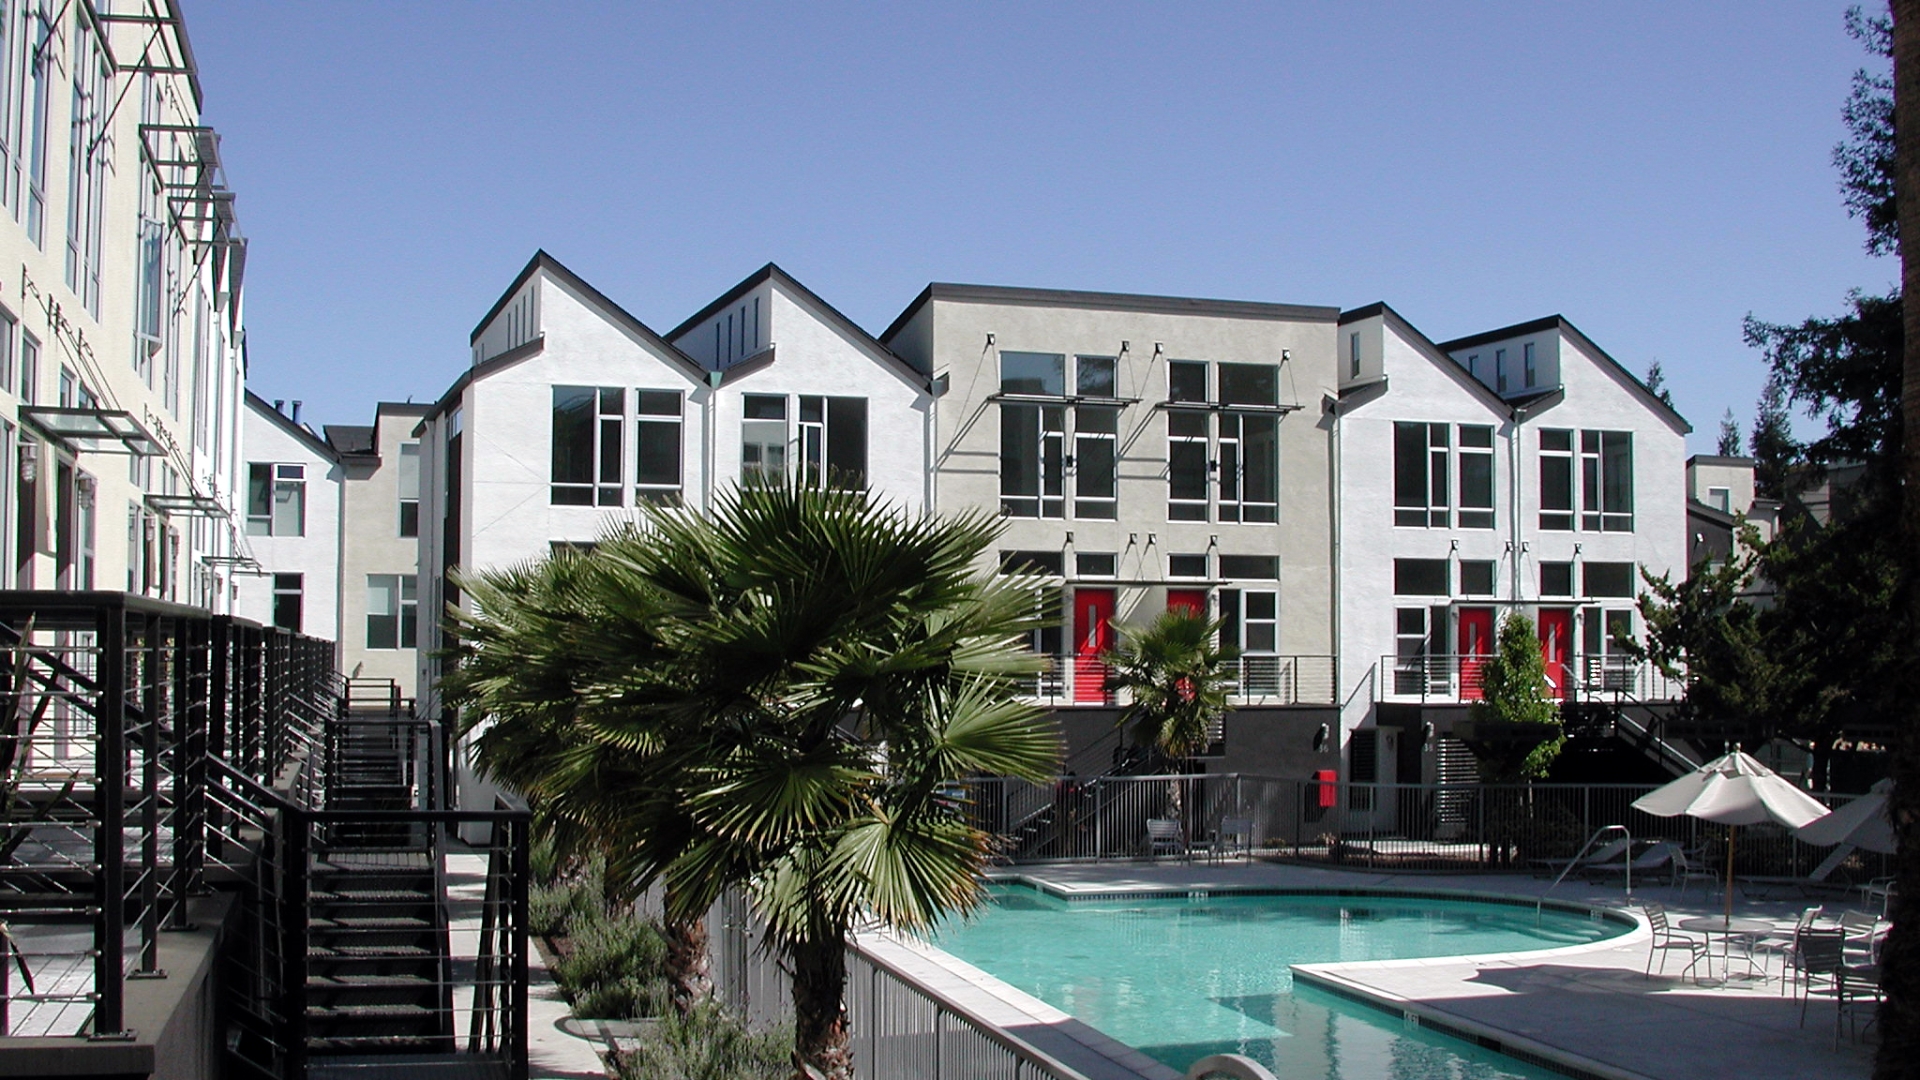 View of the pool and courtyard at Iron Horse Lofts in Walnut Creek, California.